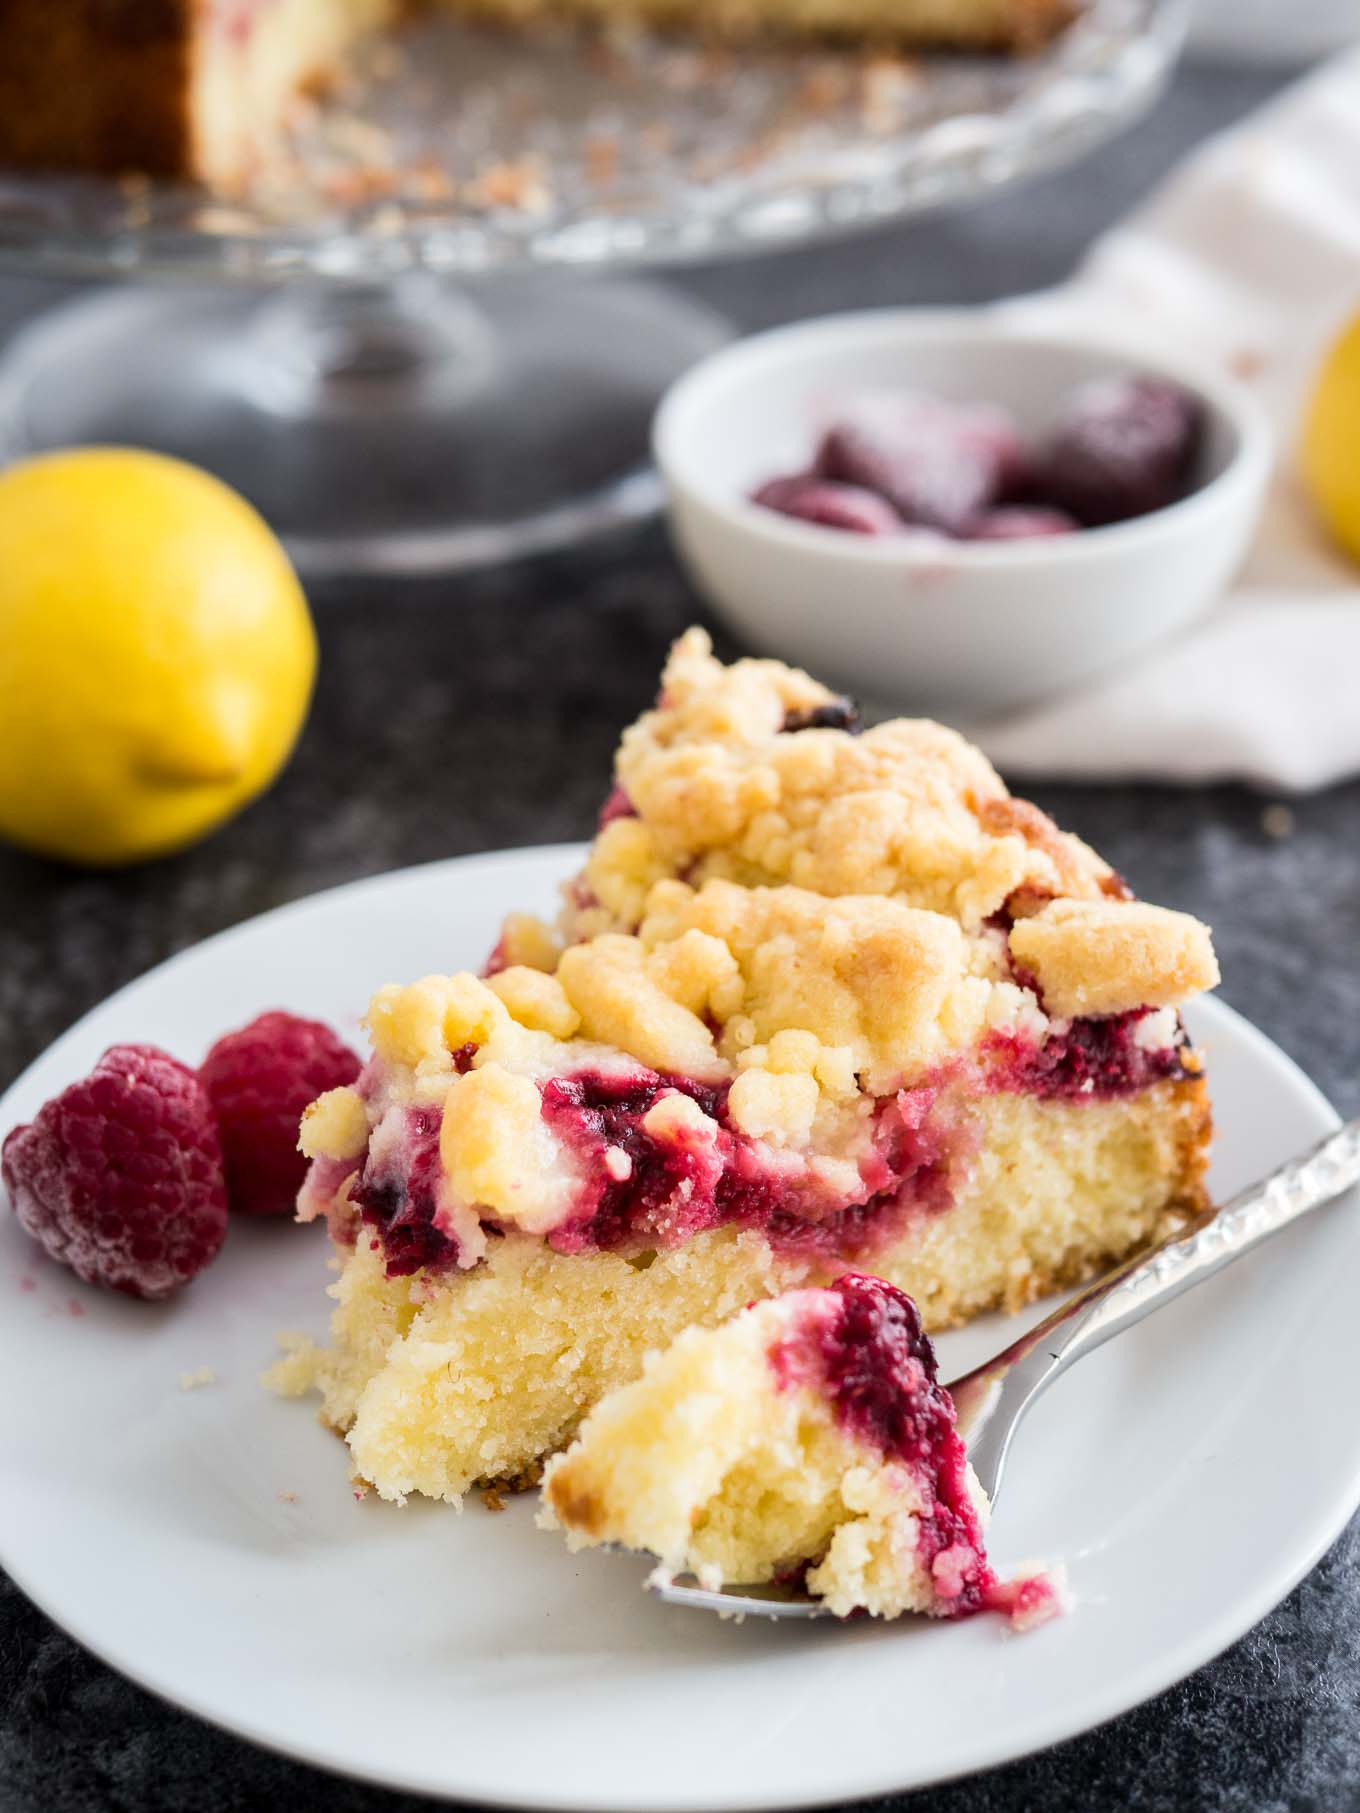 A slice of lemon raspberry cake topped with streusel on a white pate with a fork garnished with raspberries. There is a lemon, a white bowl of frozen raspberries and a glass serving platter with the rest of the cake in the background.